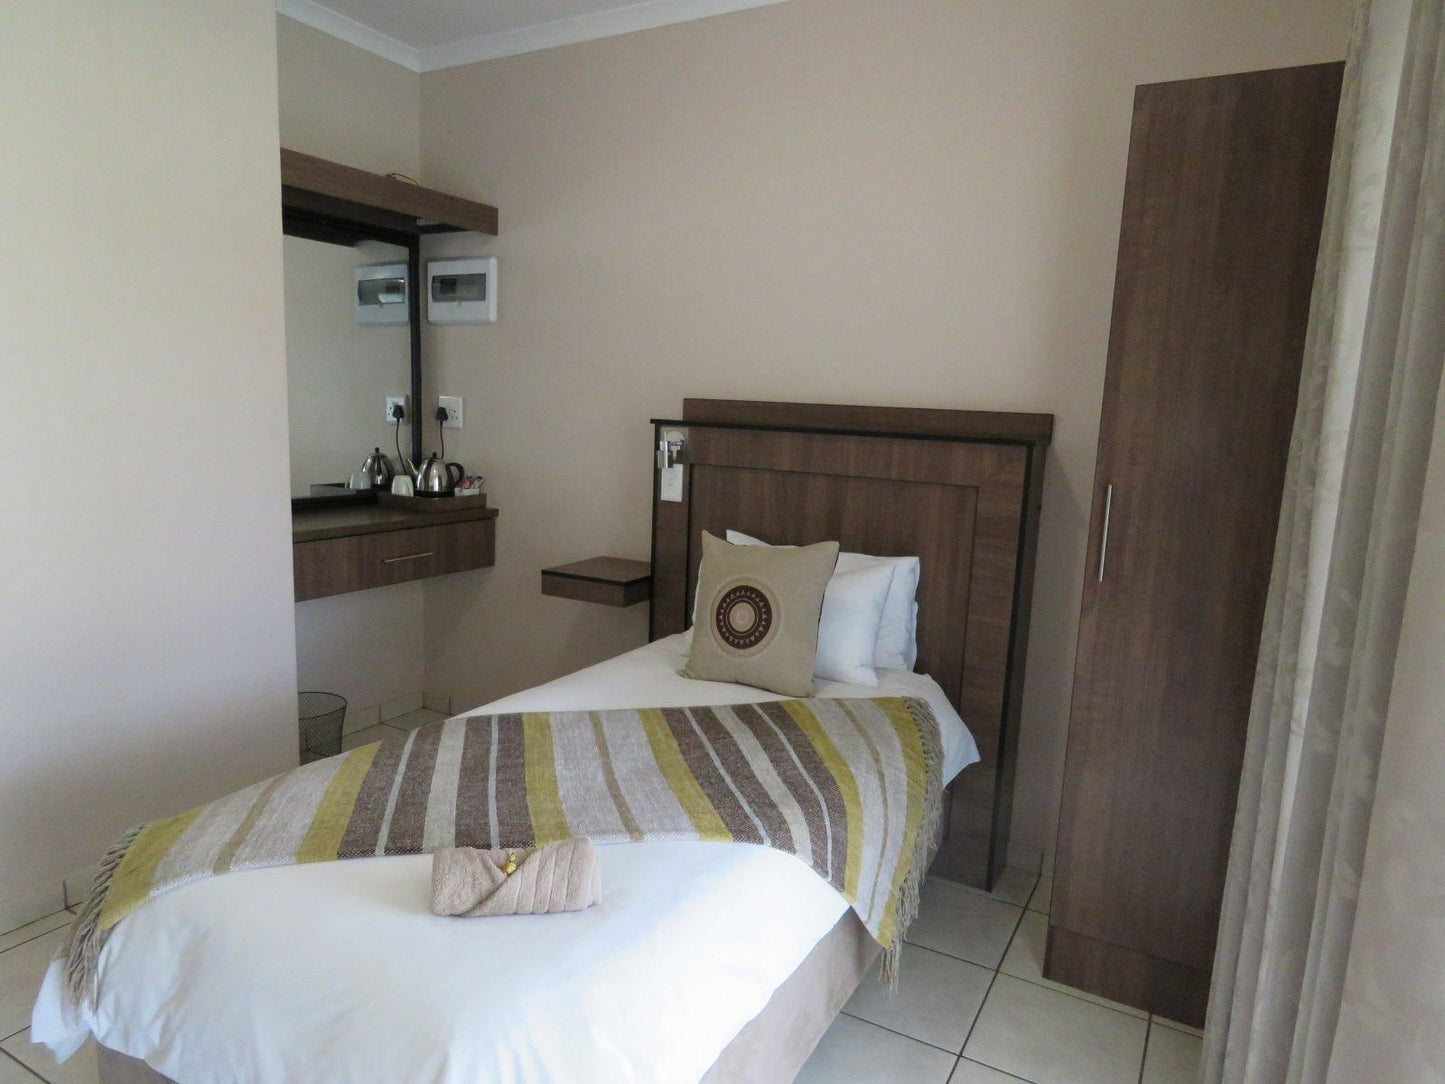 Andante Guesthouse Klerksdorp Klerksdorp North West Province South Africa Unsaturated, Bedroom